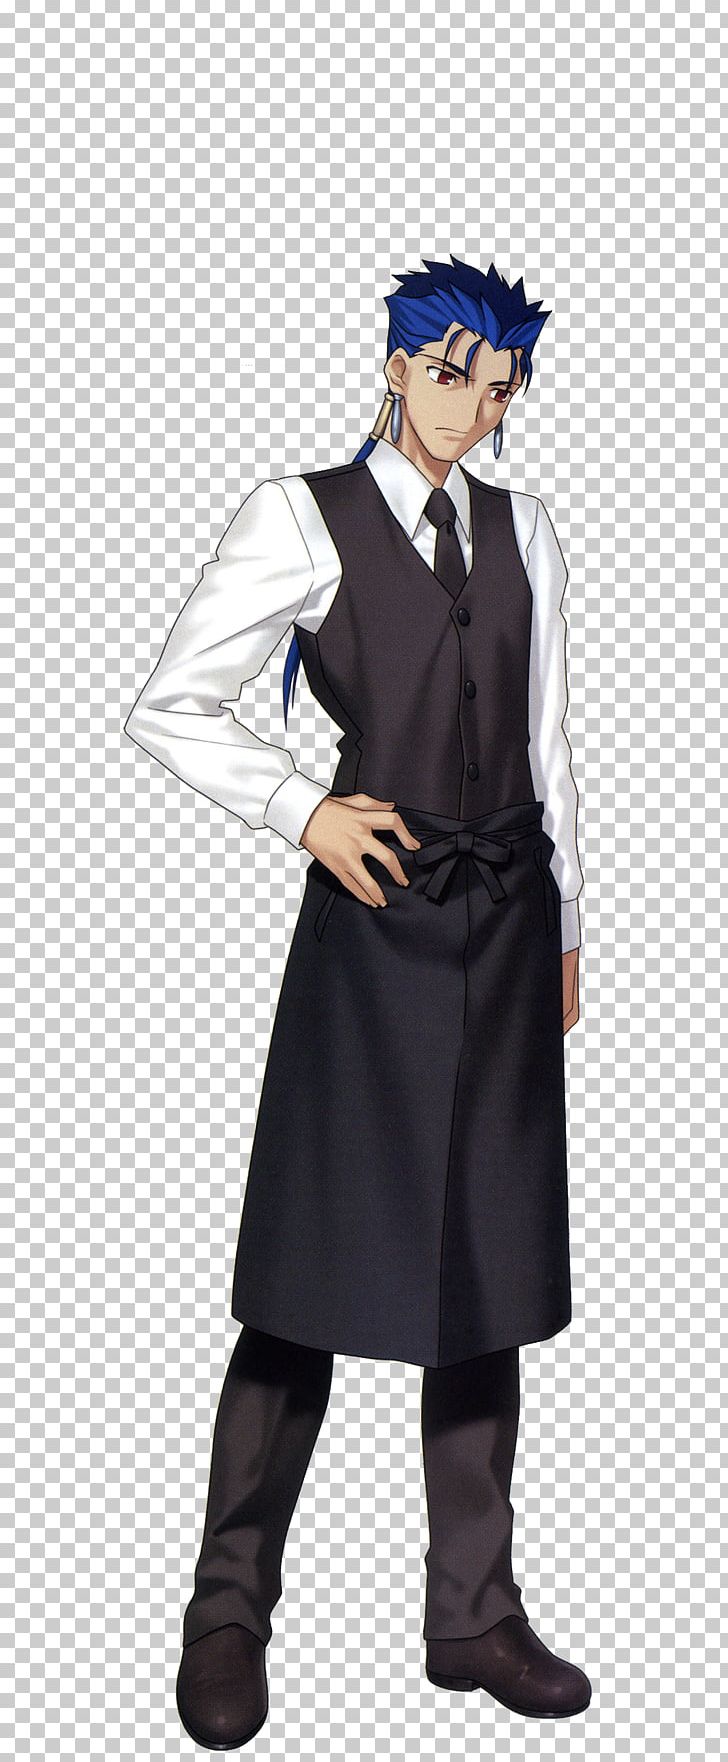 Fate Stay Night Fate Hollow Ataraxia Lancer Archer Fate Zero Png Clipart Academic Dress Anime Archer